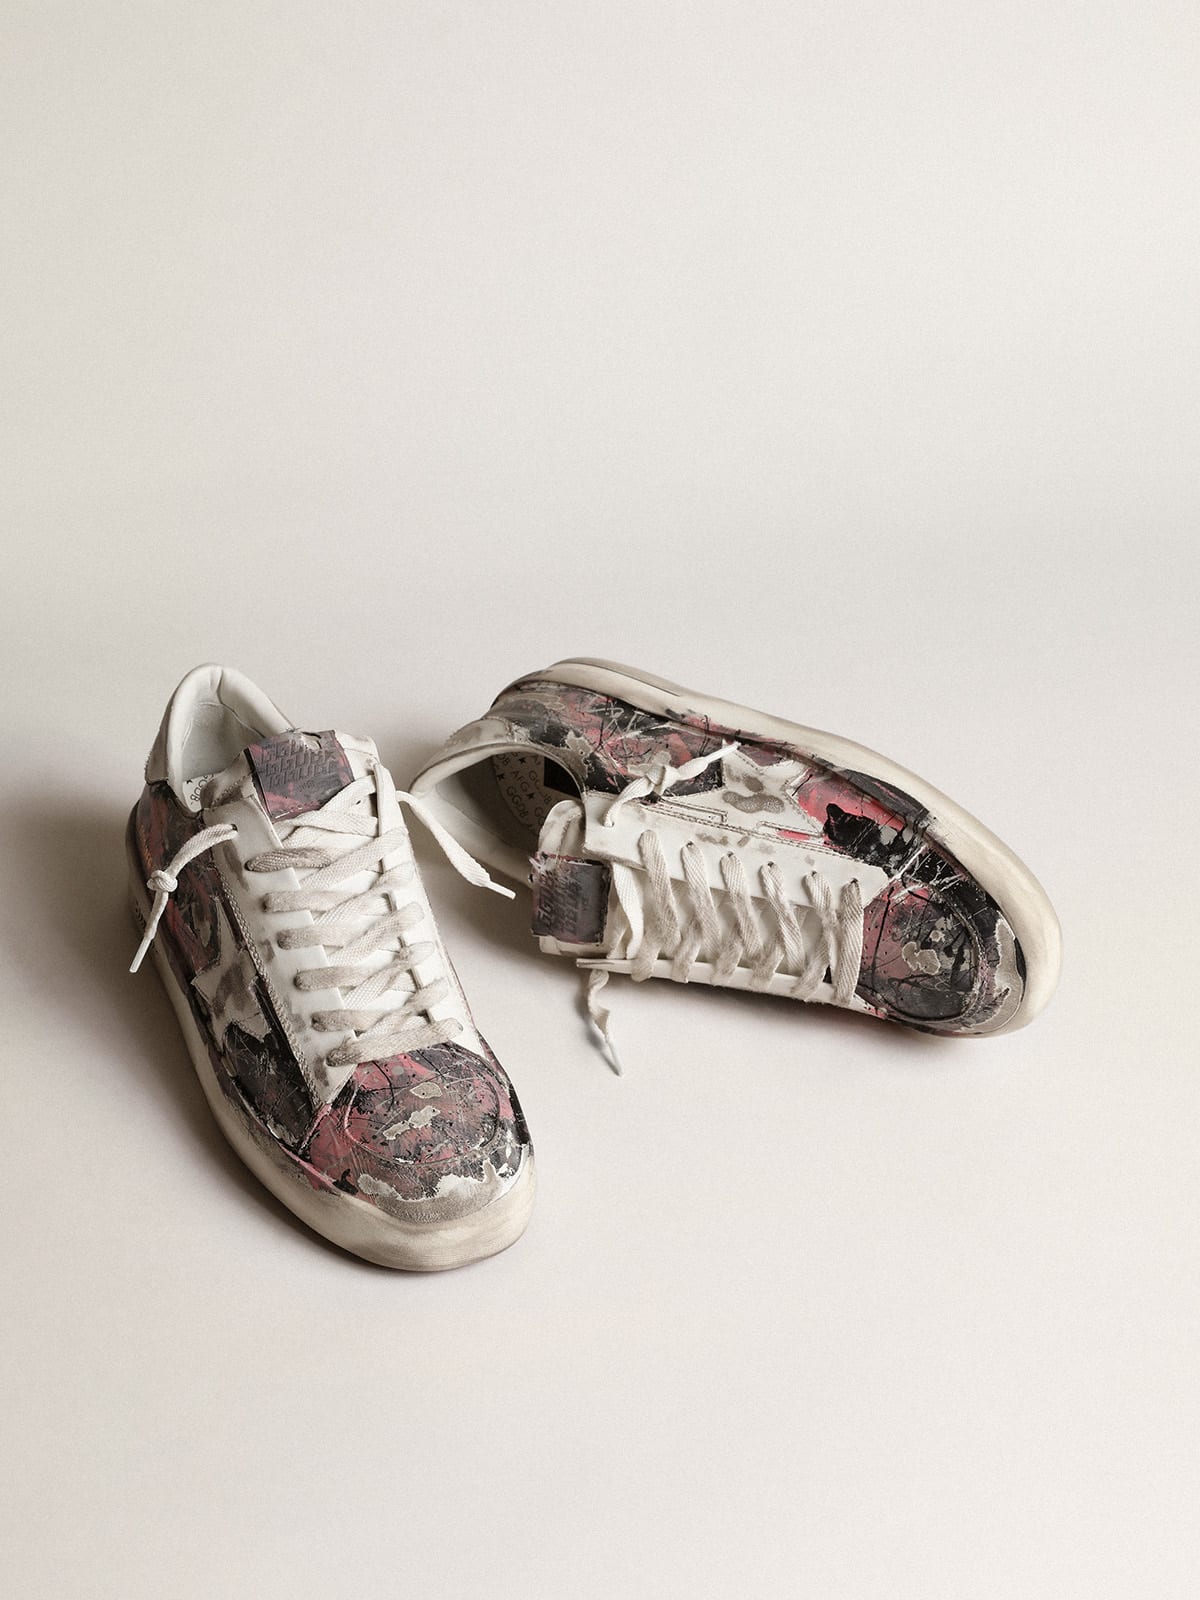 Golden Goose - Men’s Stardan LAB in leather with all-over multicolored paint splatters in 